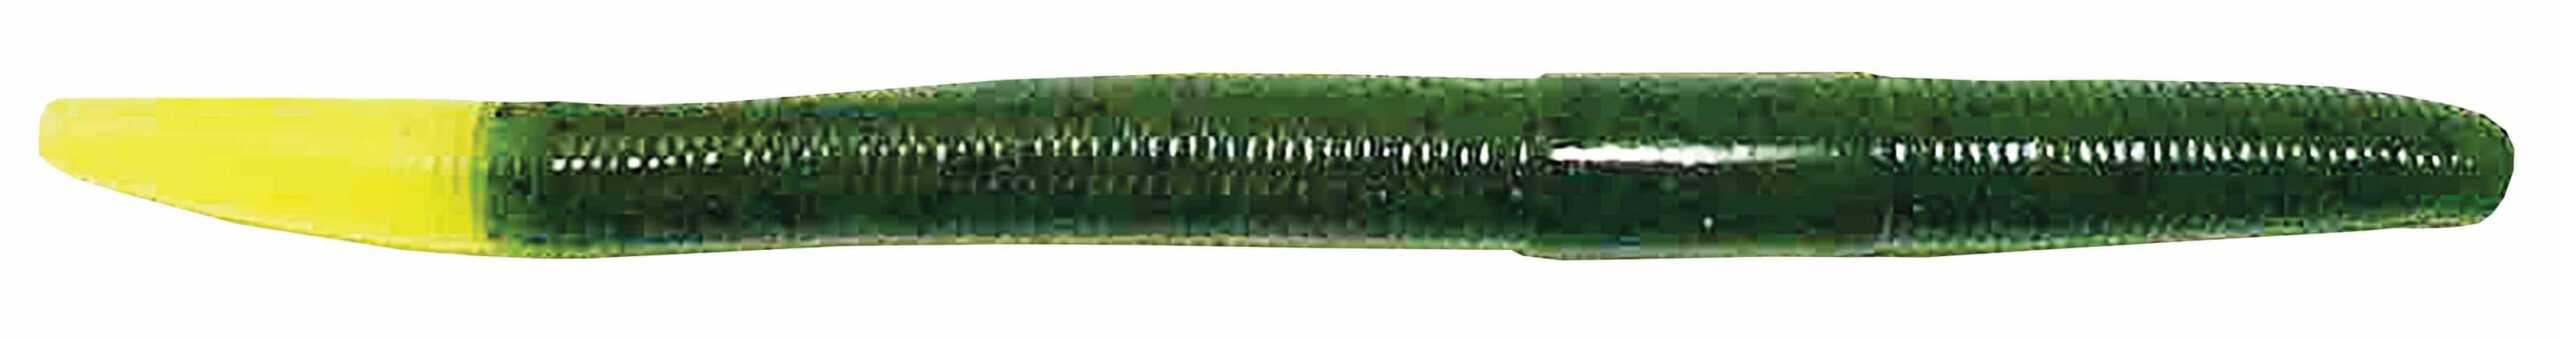 Trick Stick 5 Inch Watermelon Seed Chartreuse Tip